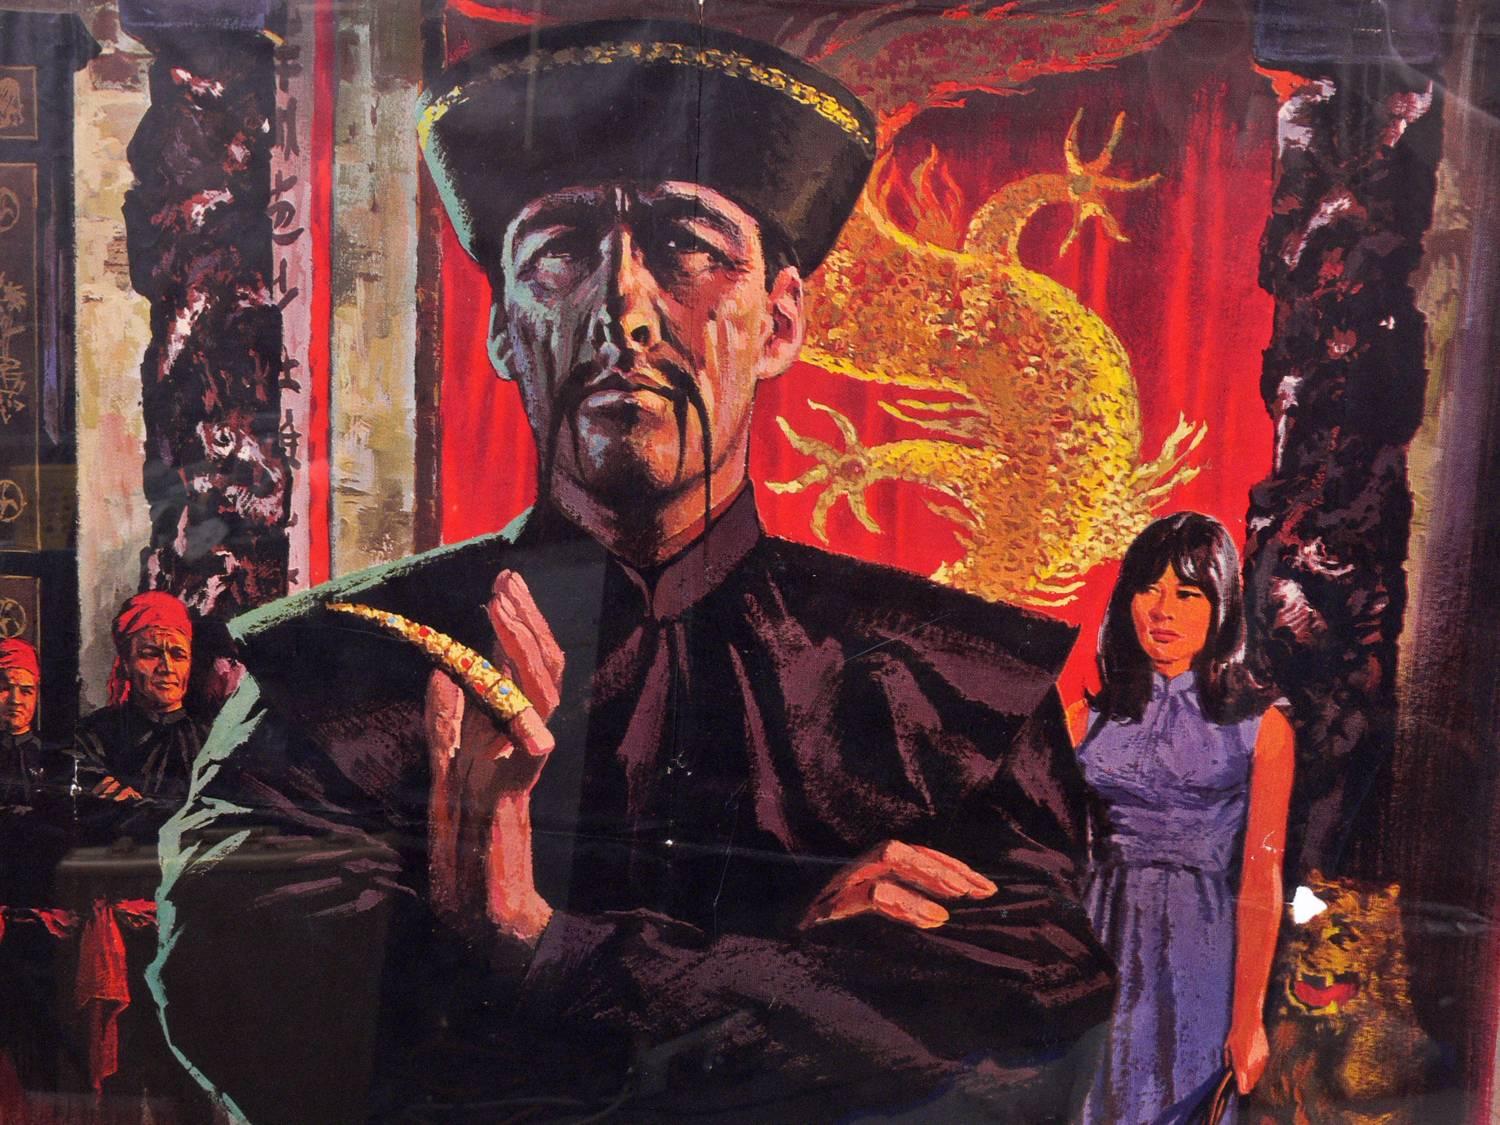 Large-scale French Movie Poster for Le Masque de Fu Manchu (The Face of Fu Manchu), which is a 1965 British/German co-production thriller based on the character of Fu Manchu, the Chinese villain created by Sax Rohmer. Don Sharp directed, with